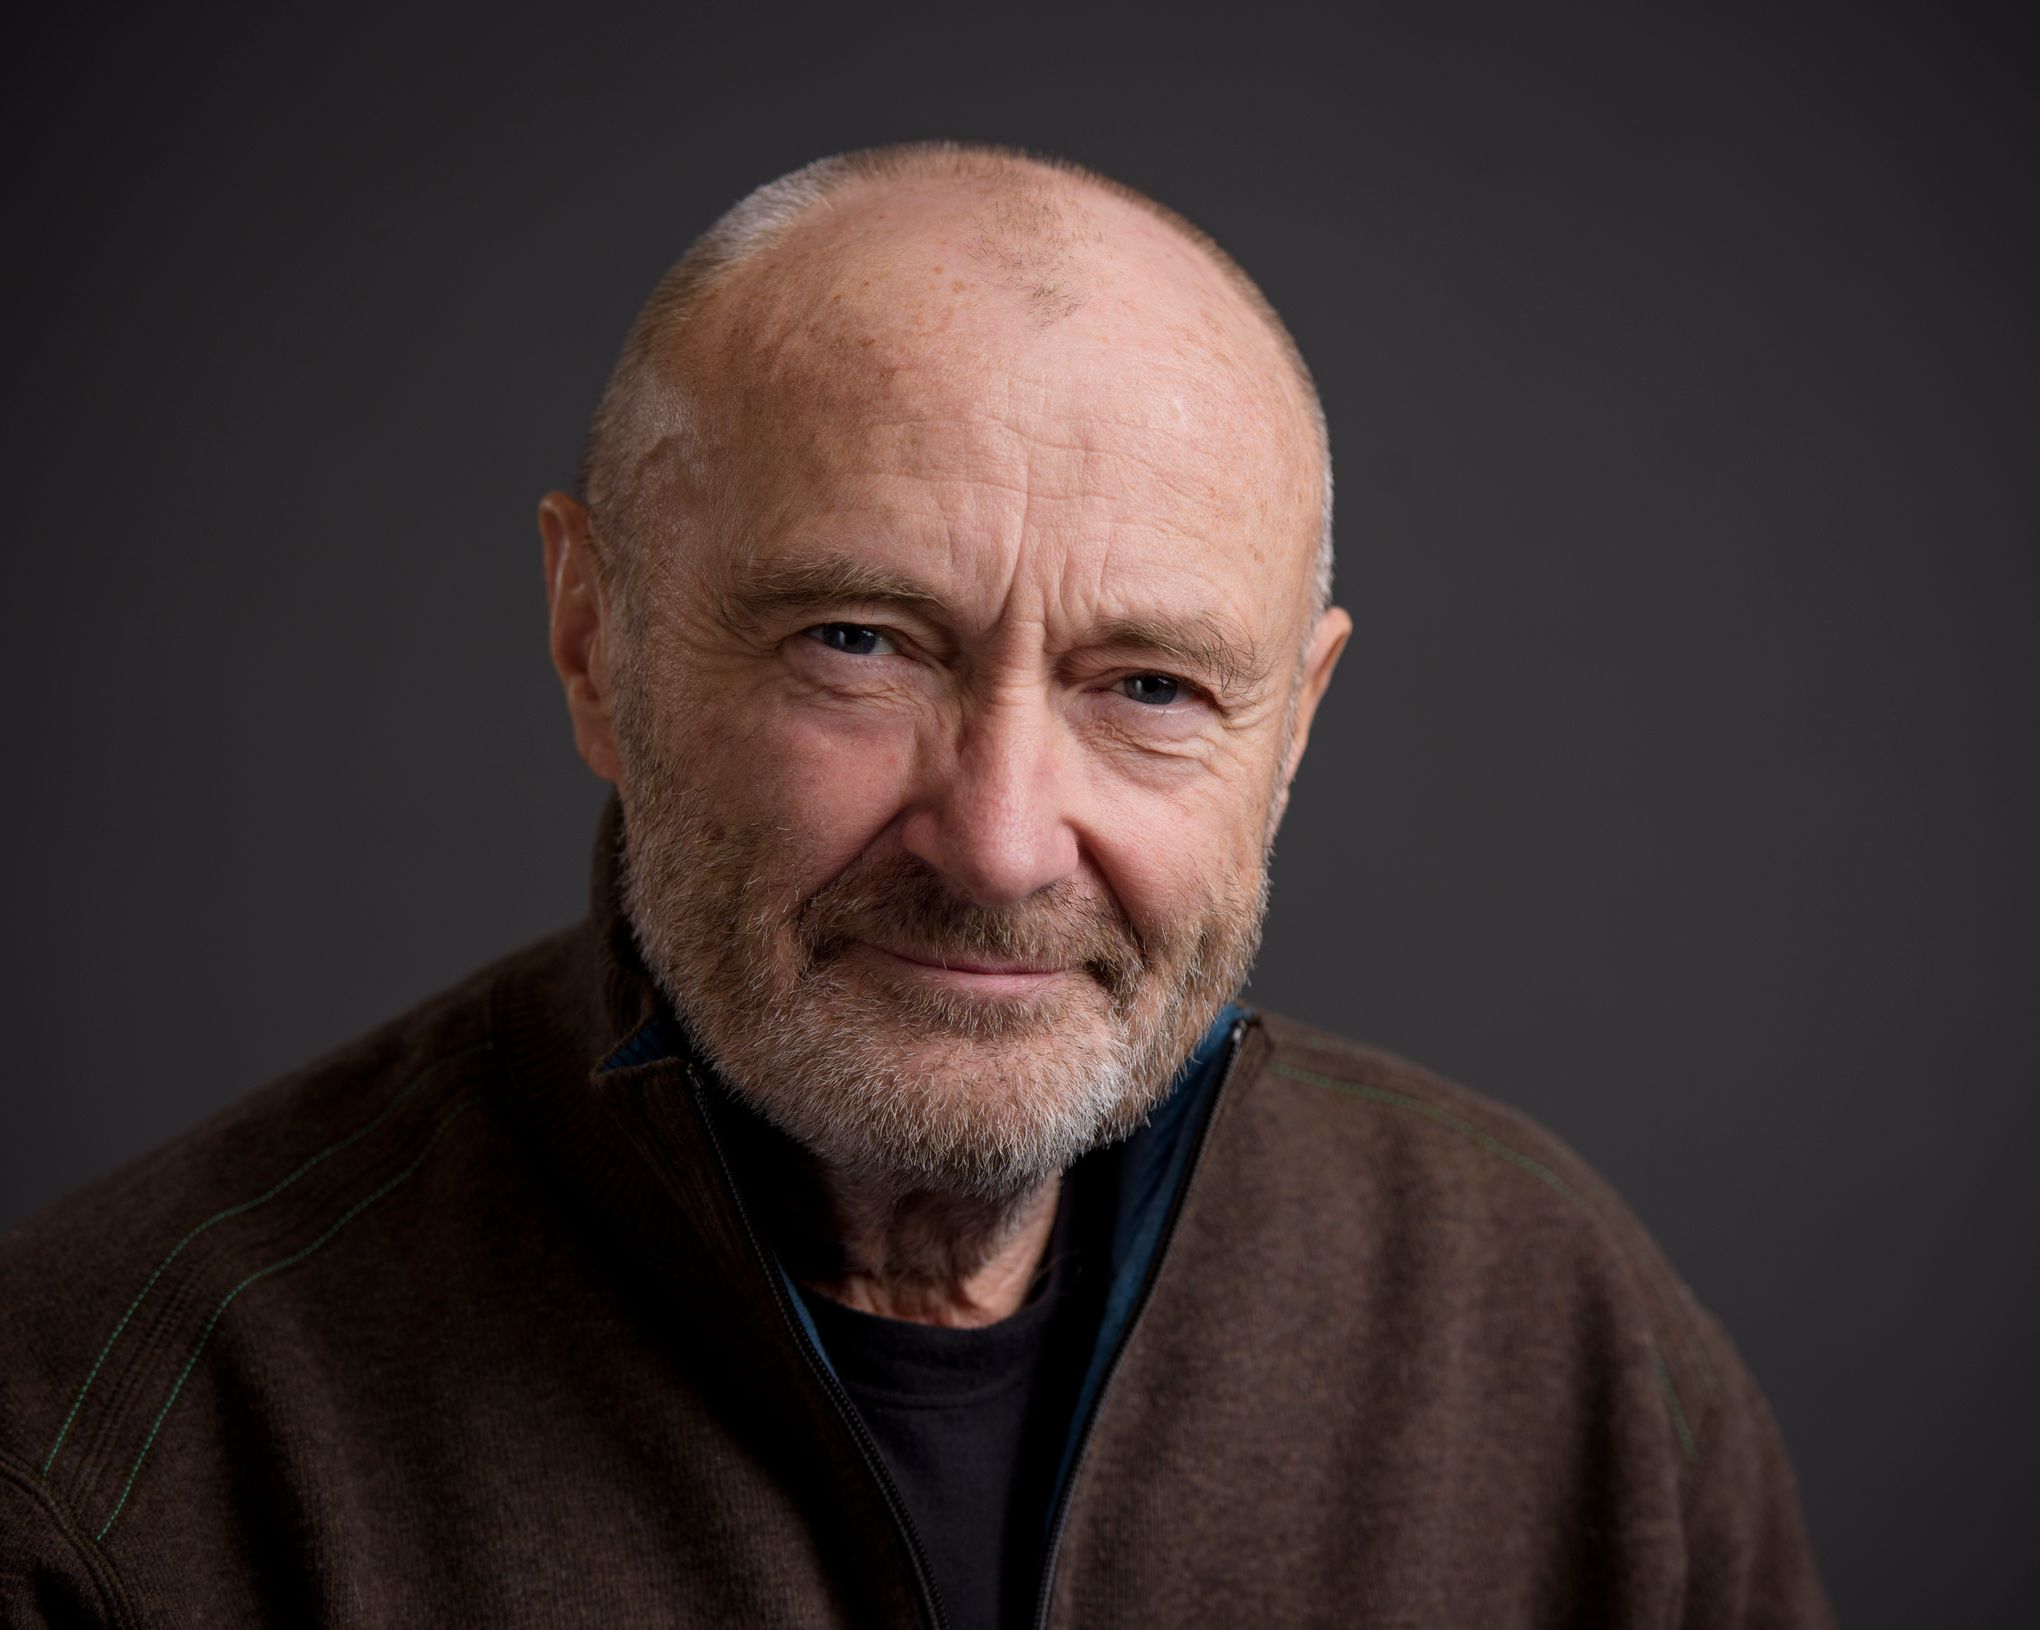 Phil Collins returns, saying: Take a (new) look at me now